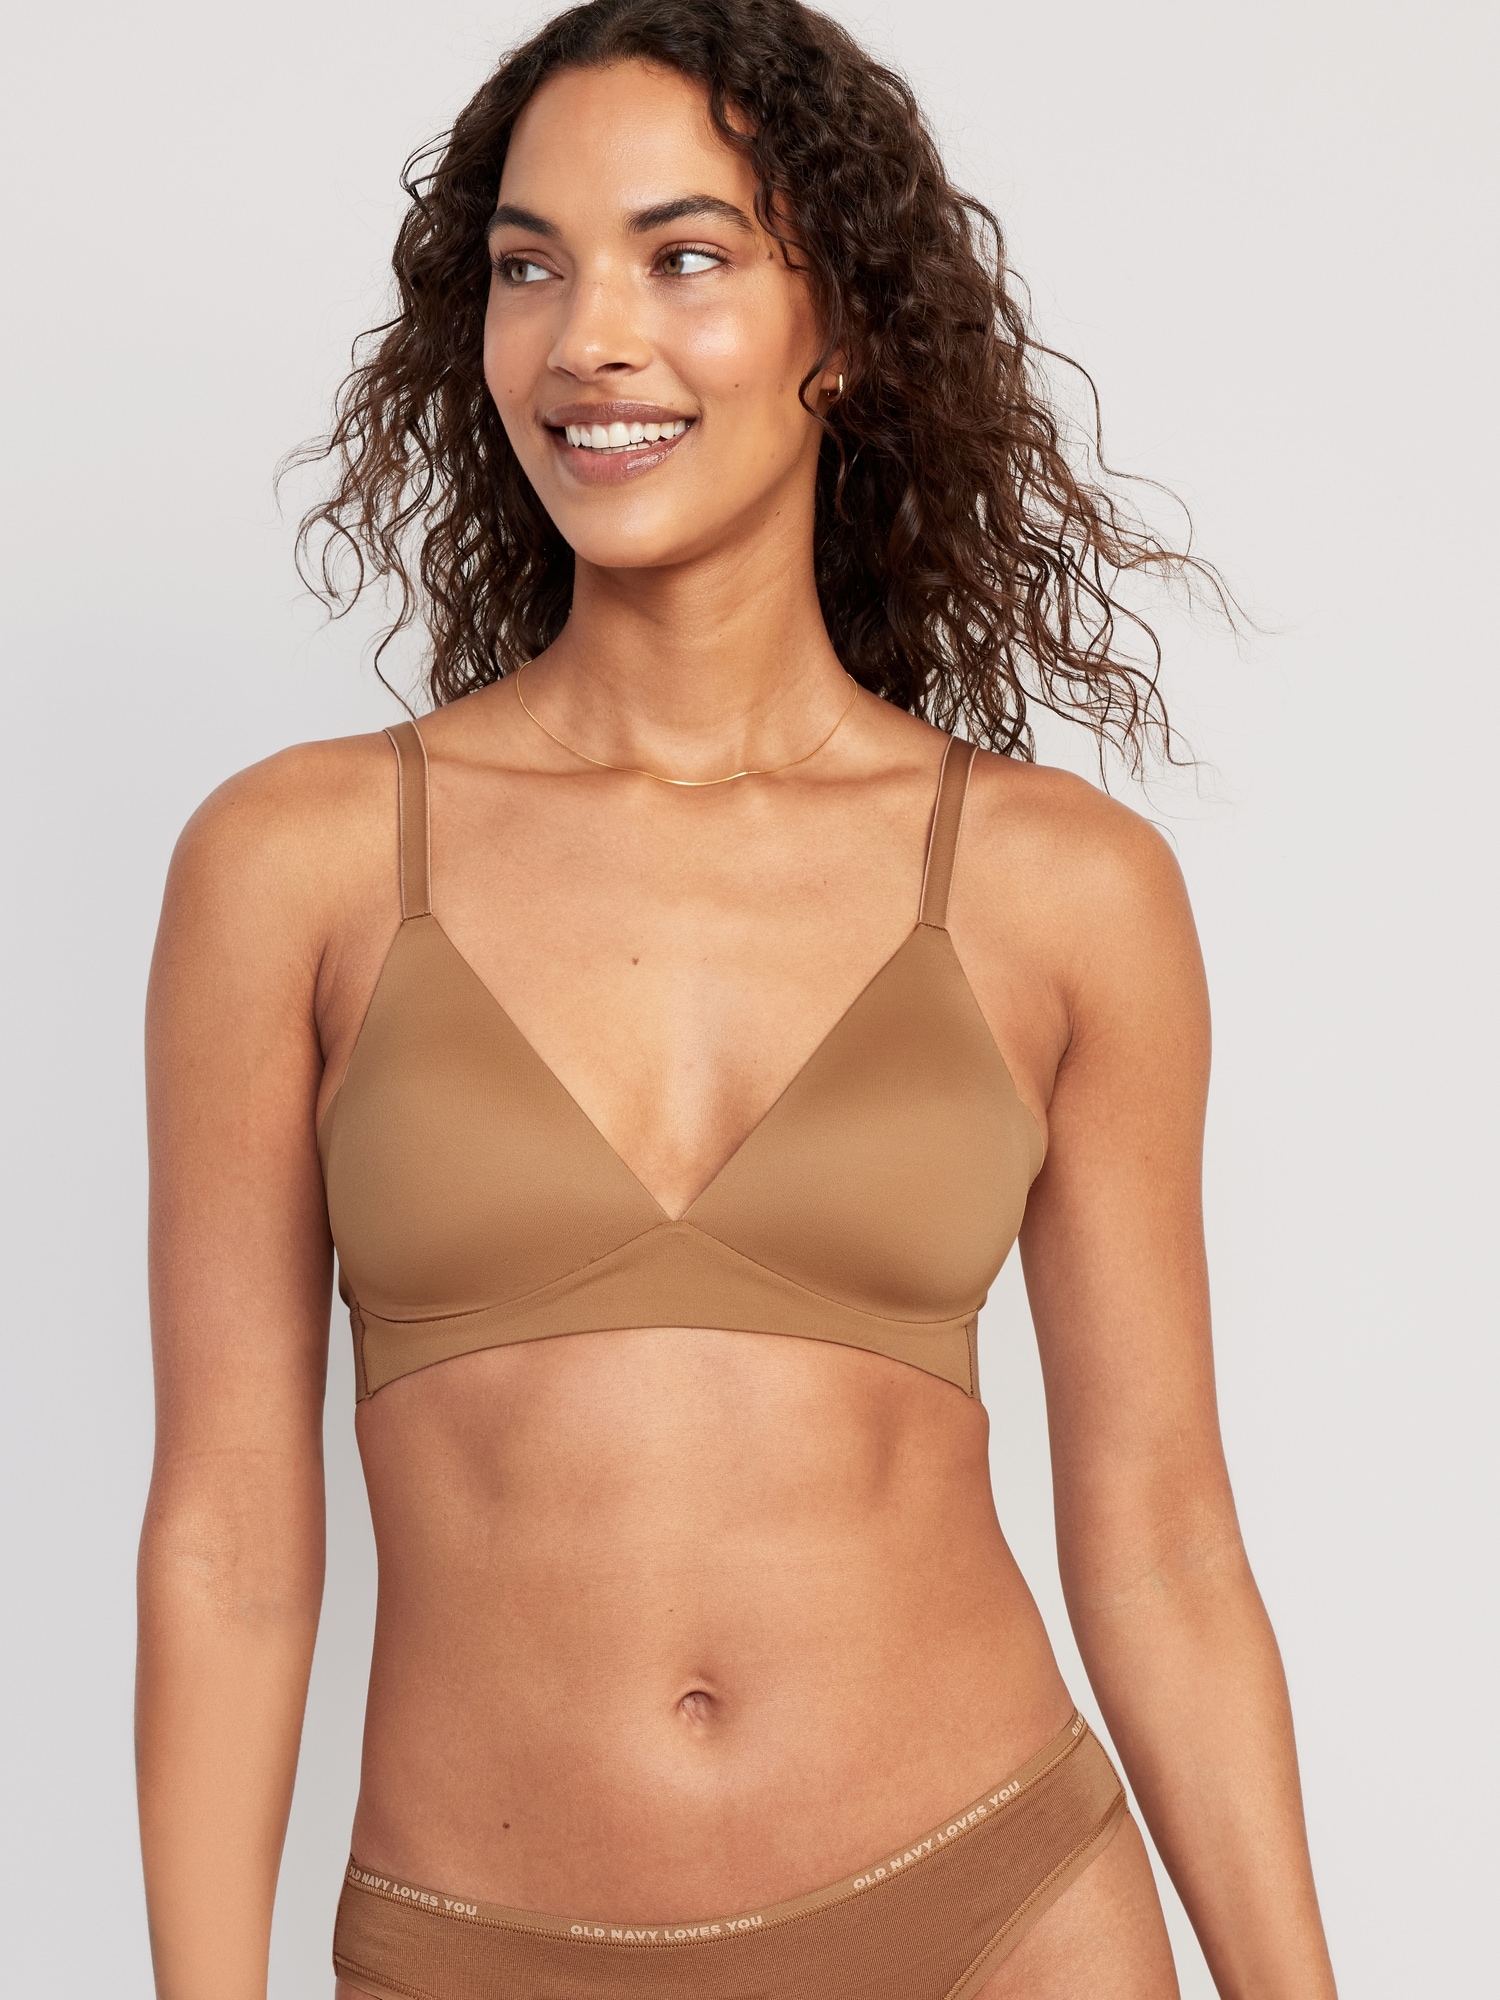 Need a new bra? Check out Old Navy's new intimate collection